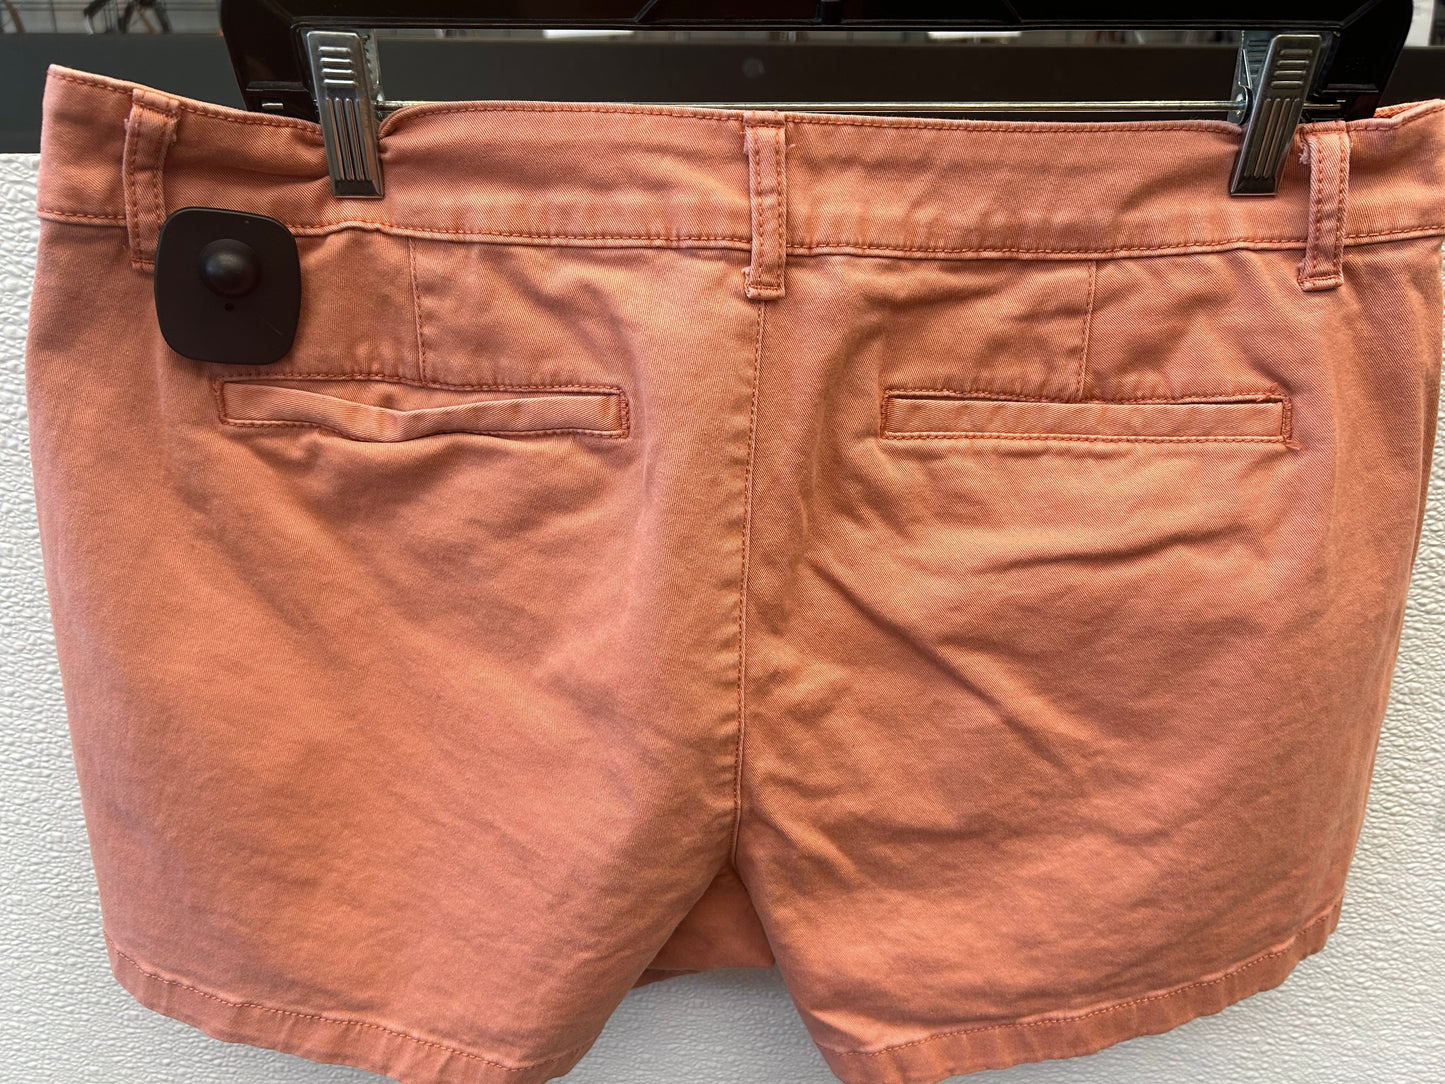 Shorts By Ana  Size: 12